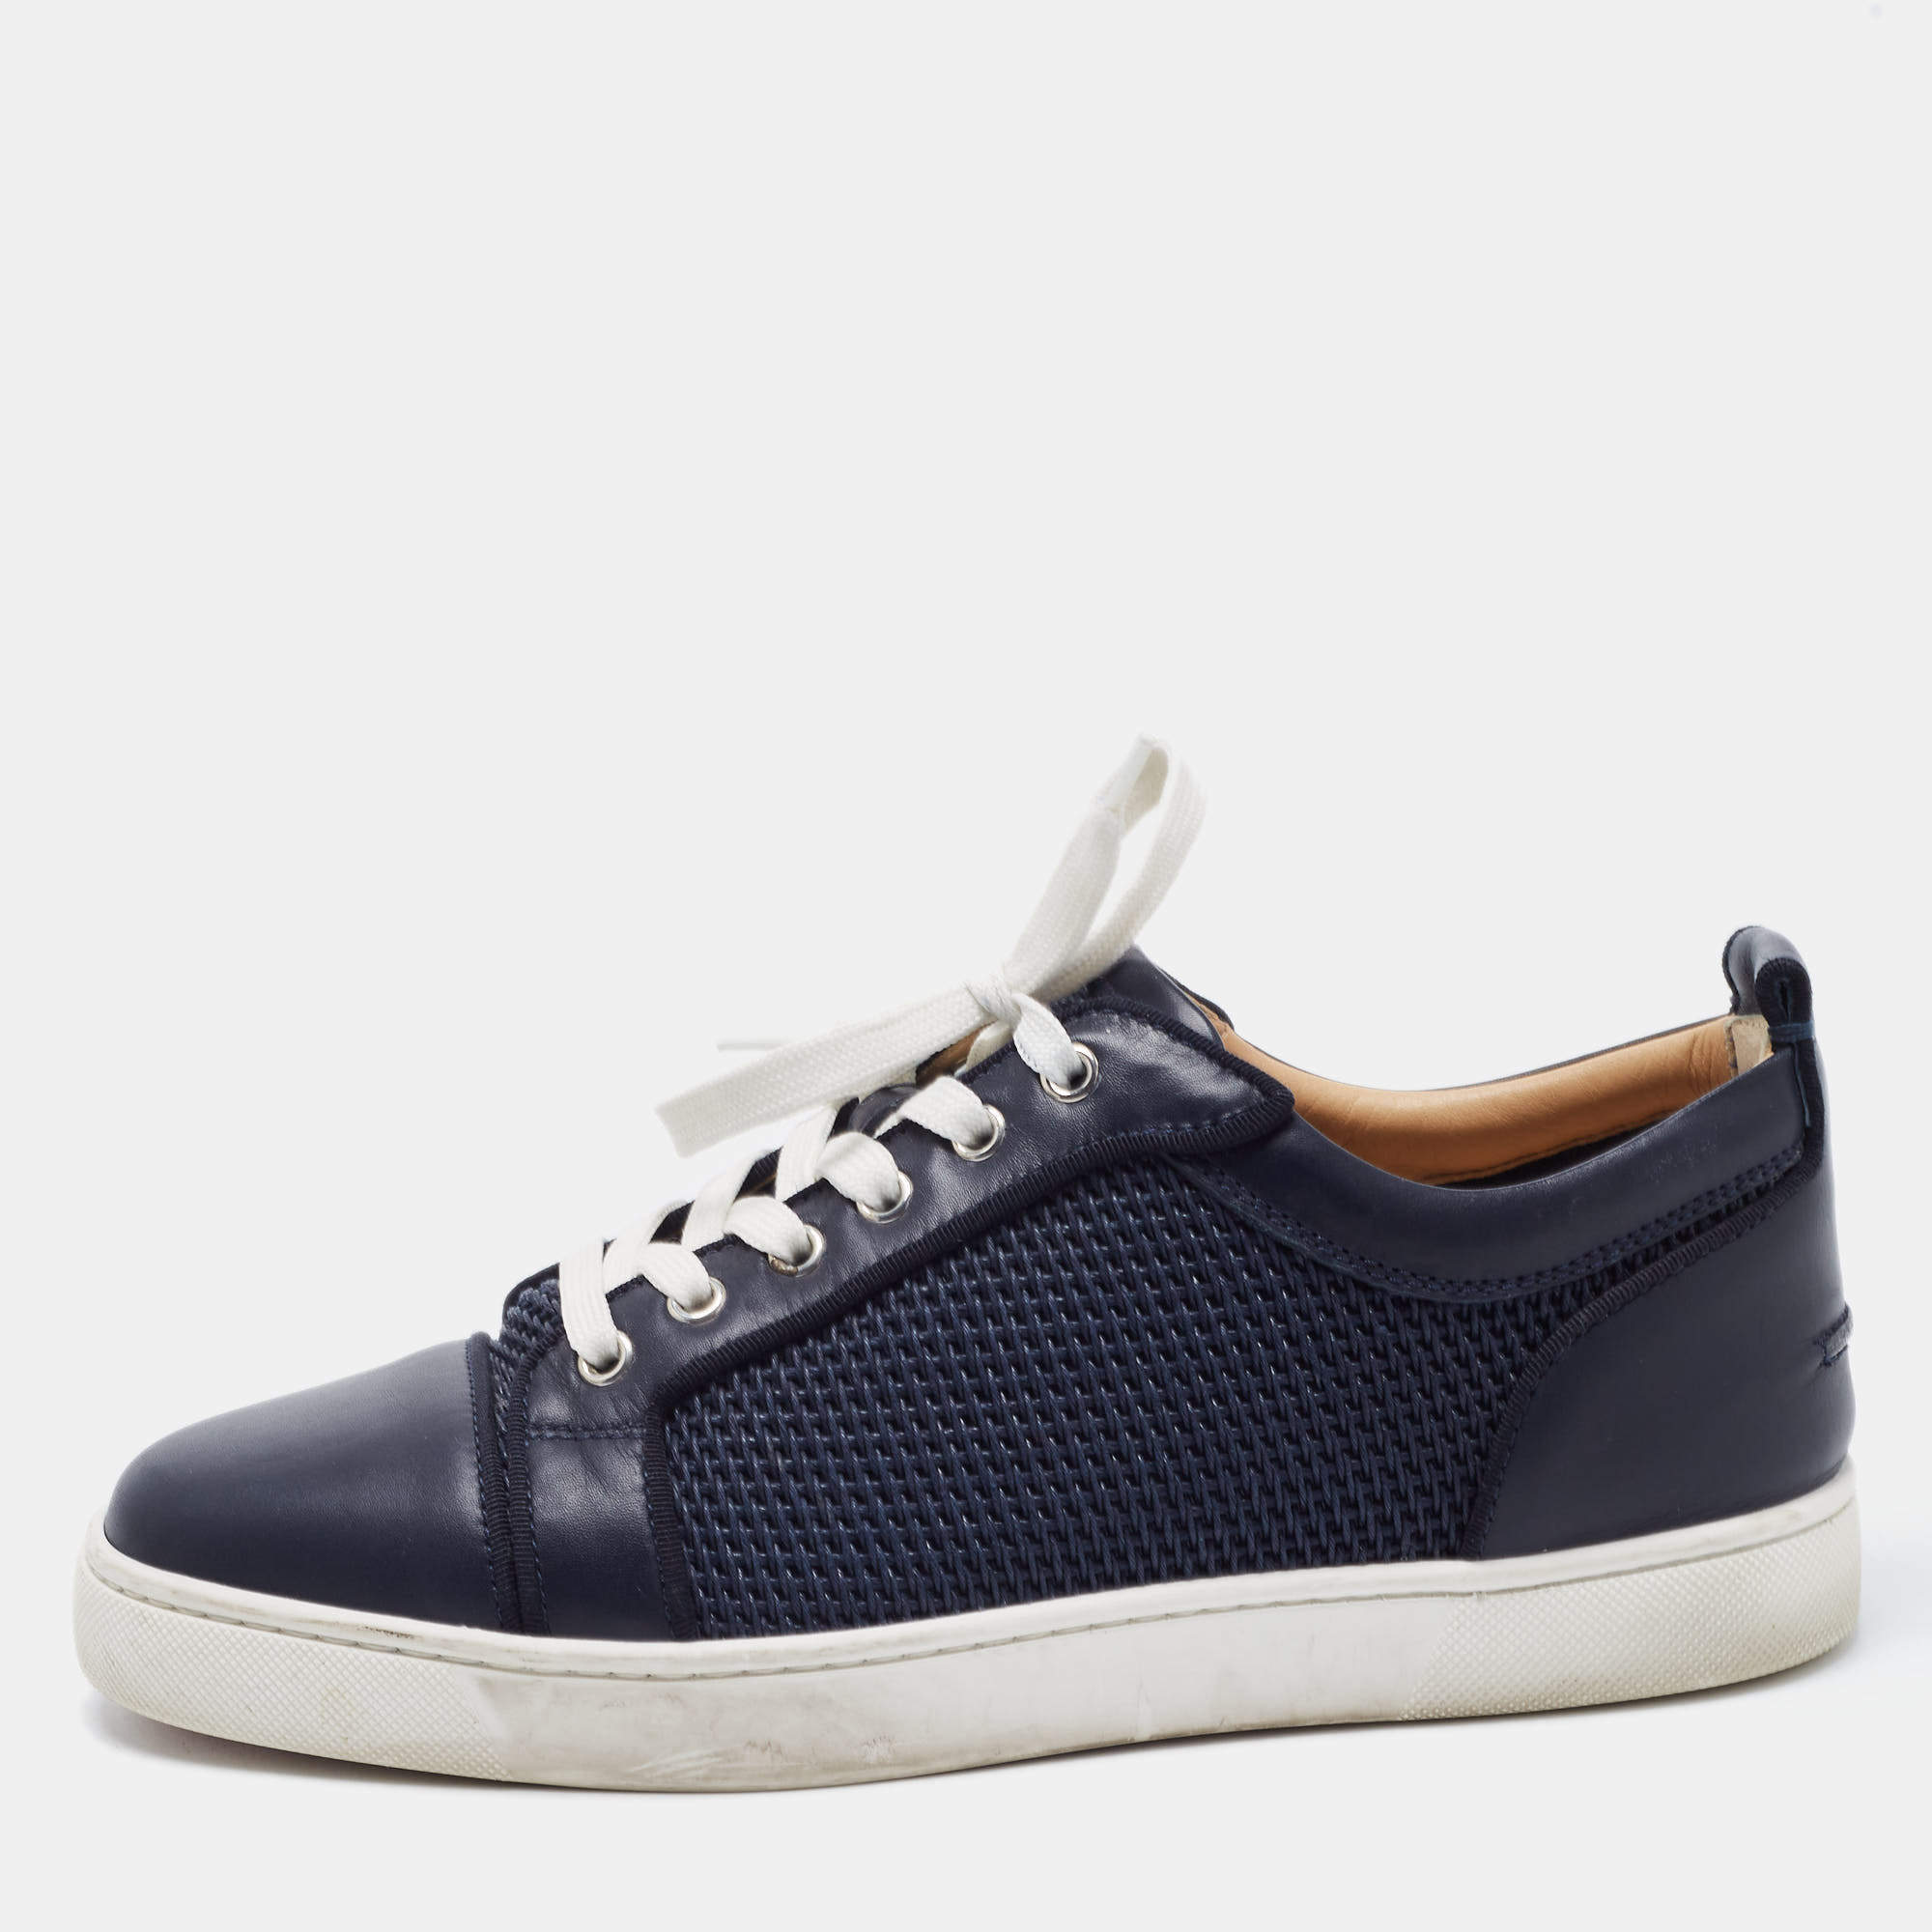 Christian Louboutin Authentic Sneakers Shoes Navy 42 Used from